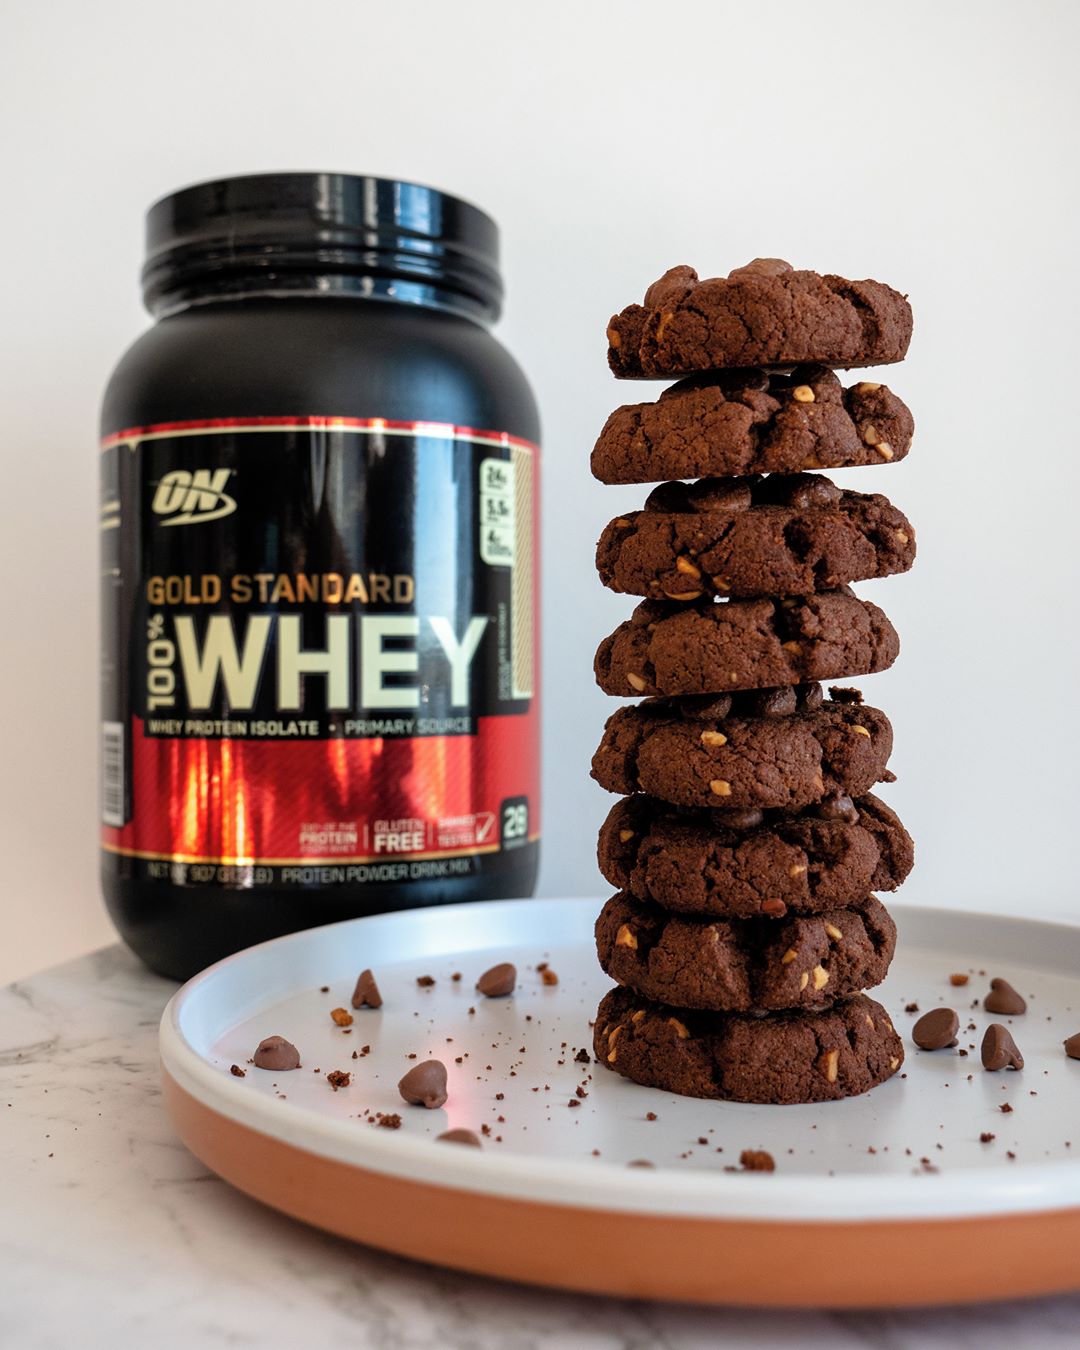 Chocolate Peanut Butter Protein Cookies - Gold Standard 100% Whey by Optimum Nutrition | MAK Fitness